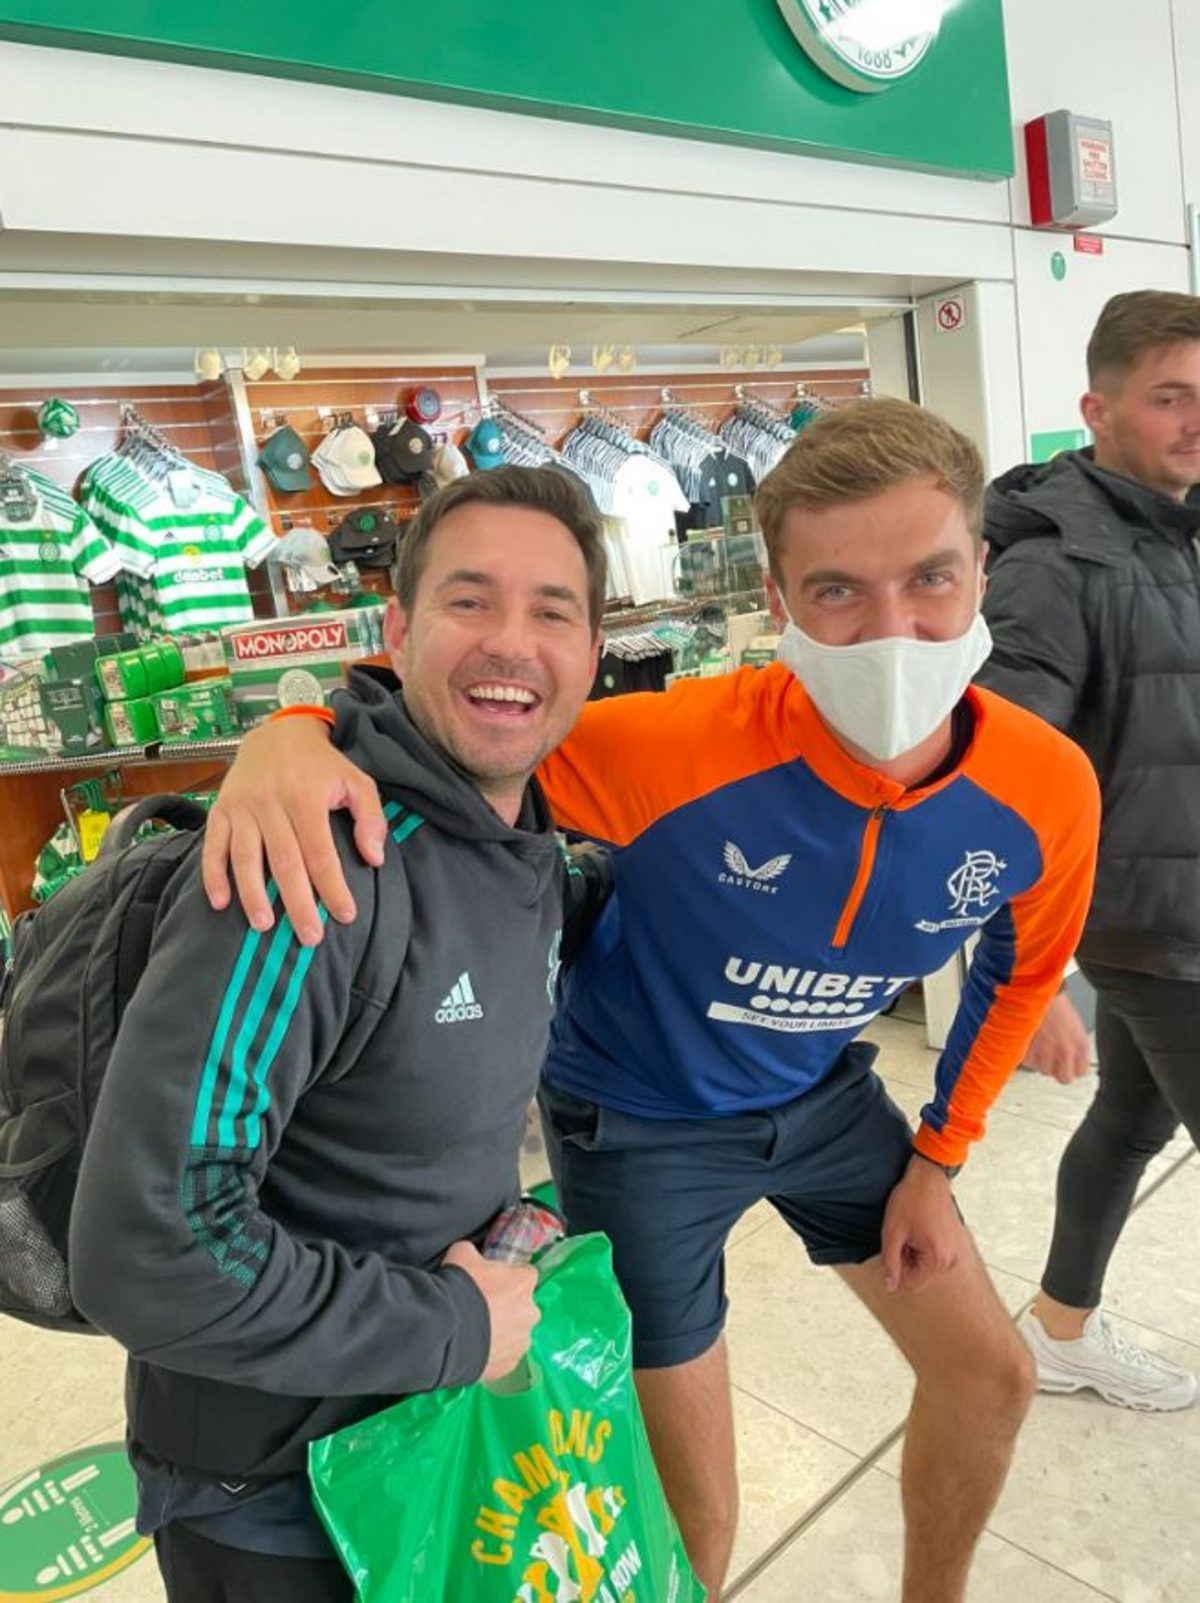 Martin Compston poses with Rangers fan outside Glasgow Airport Celtic Shop